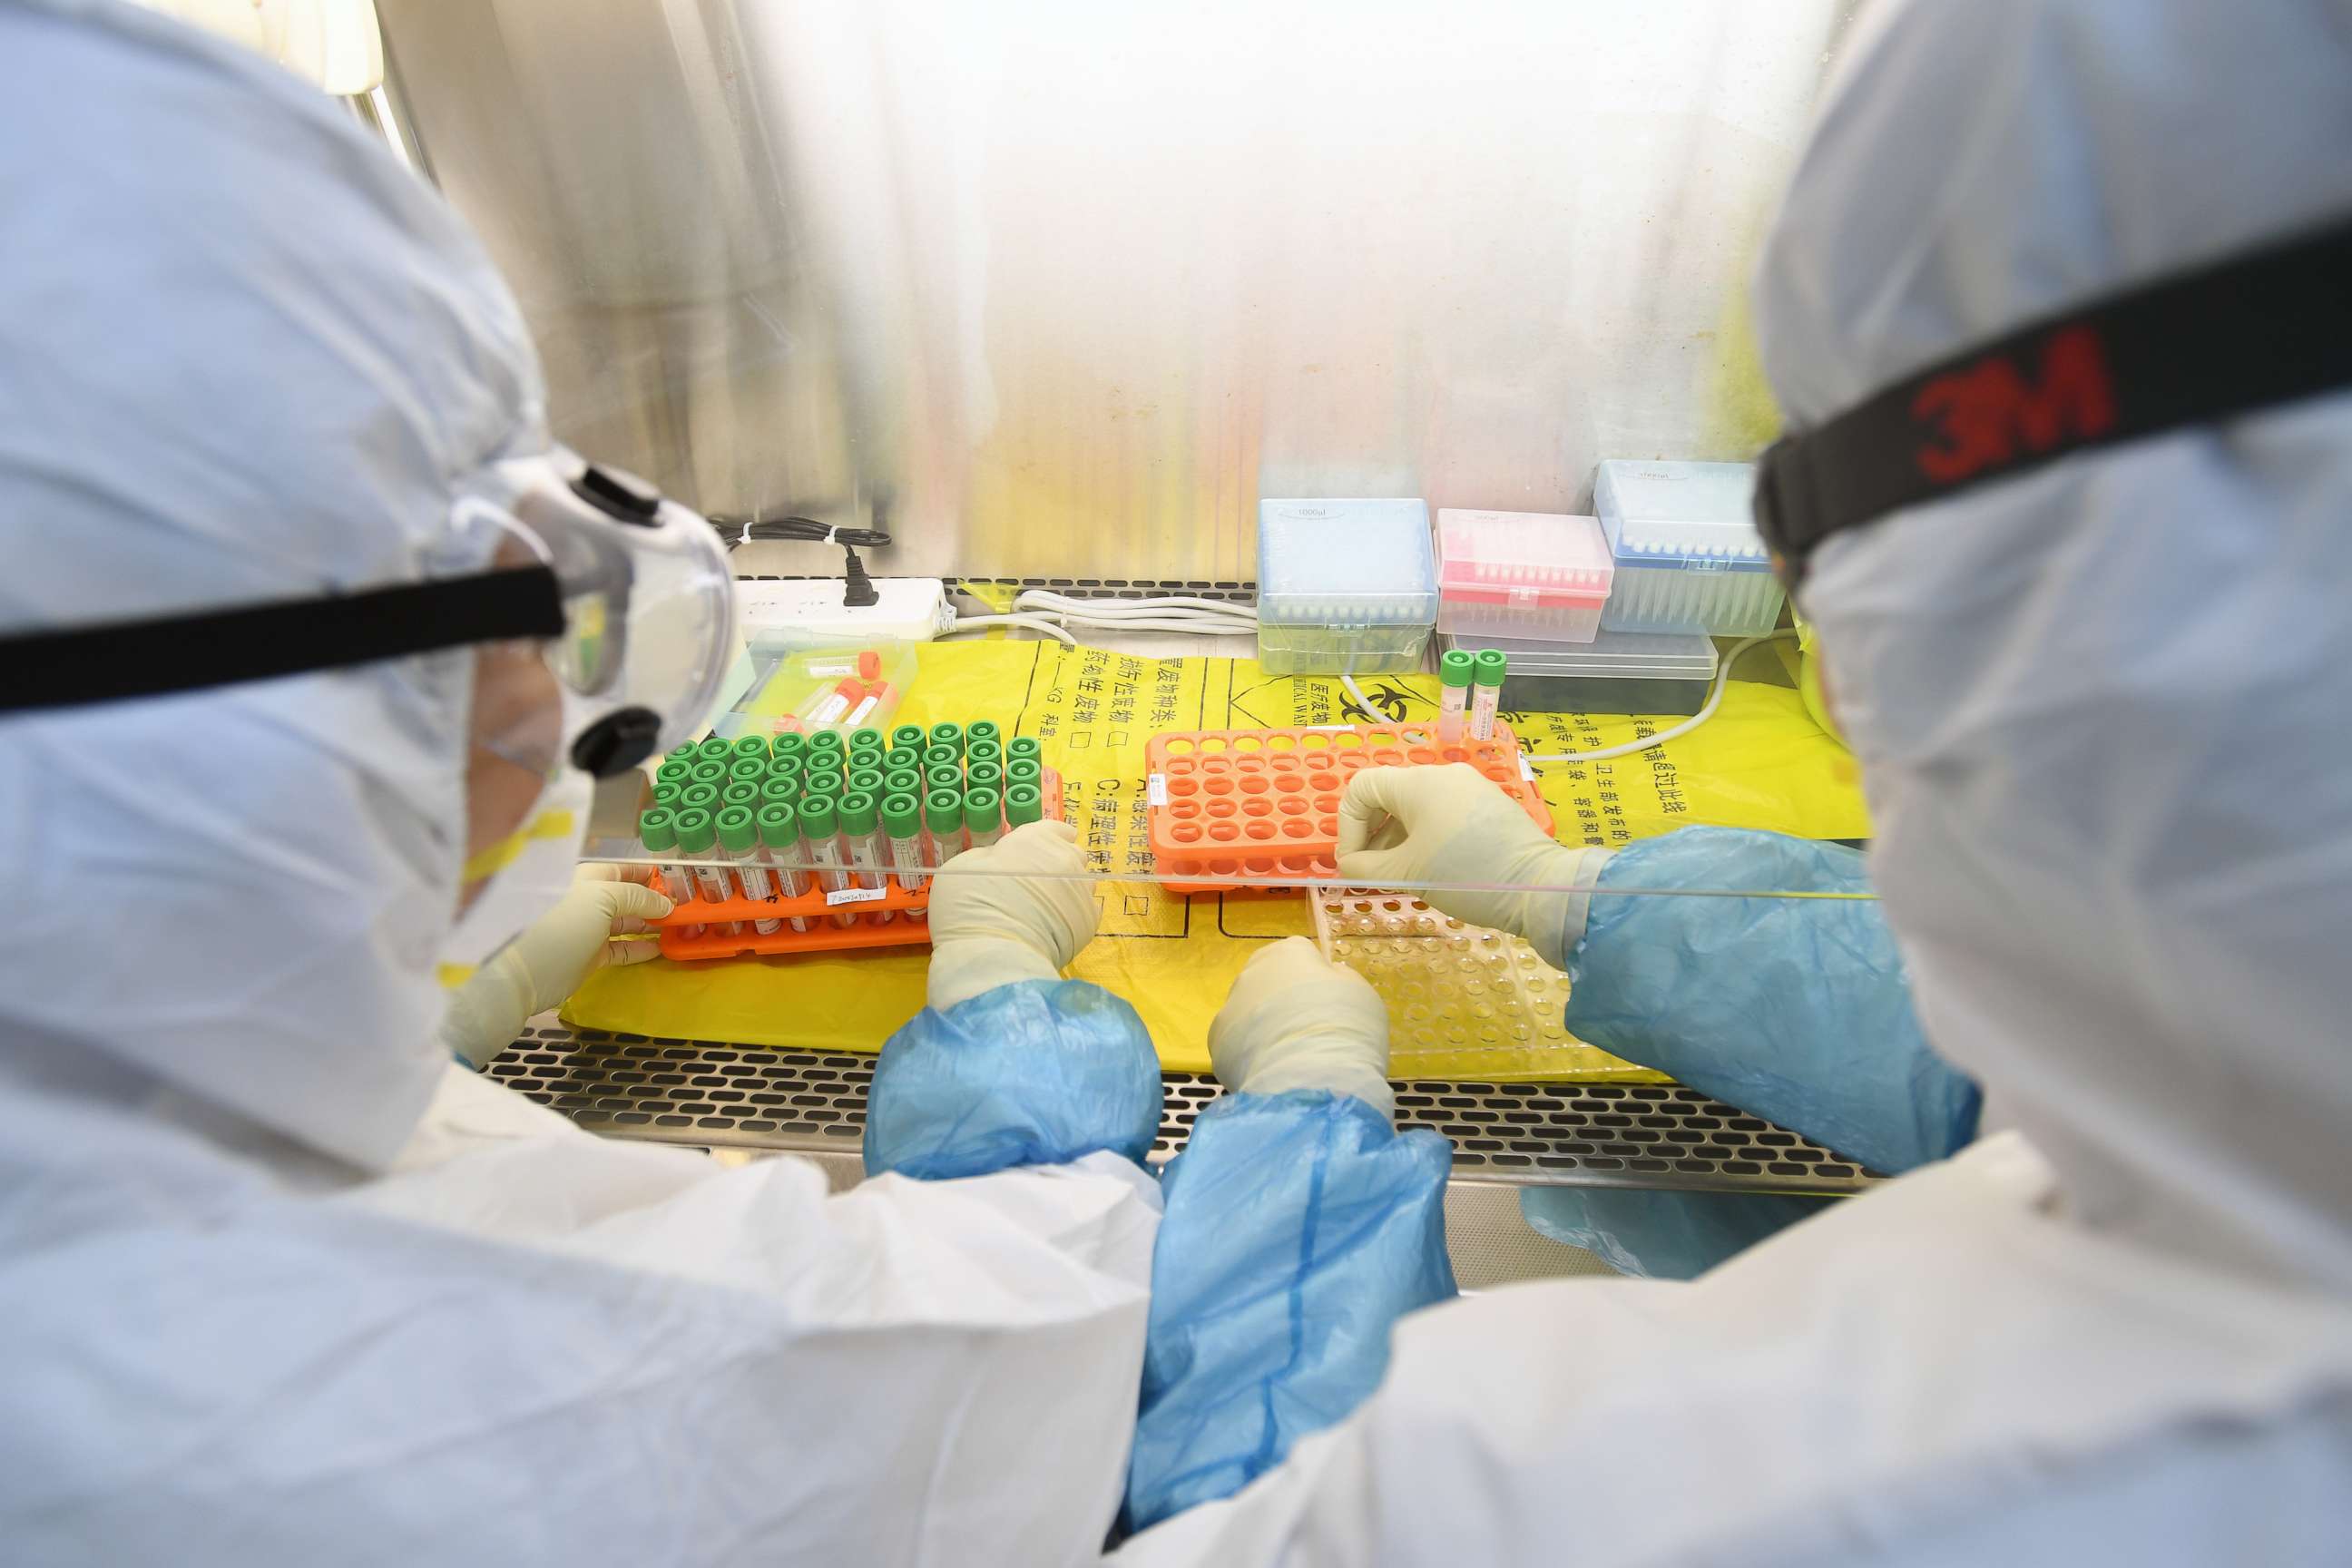 PHOTO: Workers in protective suits examine specimens inside a laboratory following an outbreak of the novel coronavirus in Wuhan, Hubei province, China February 6, 2020. 